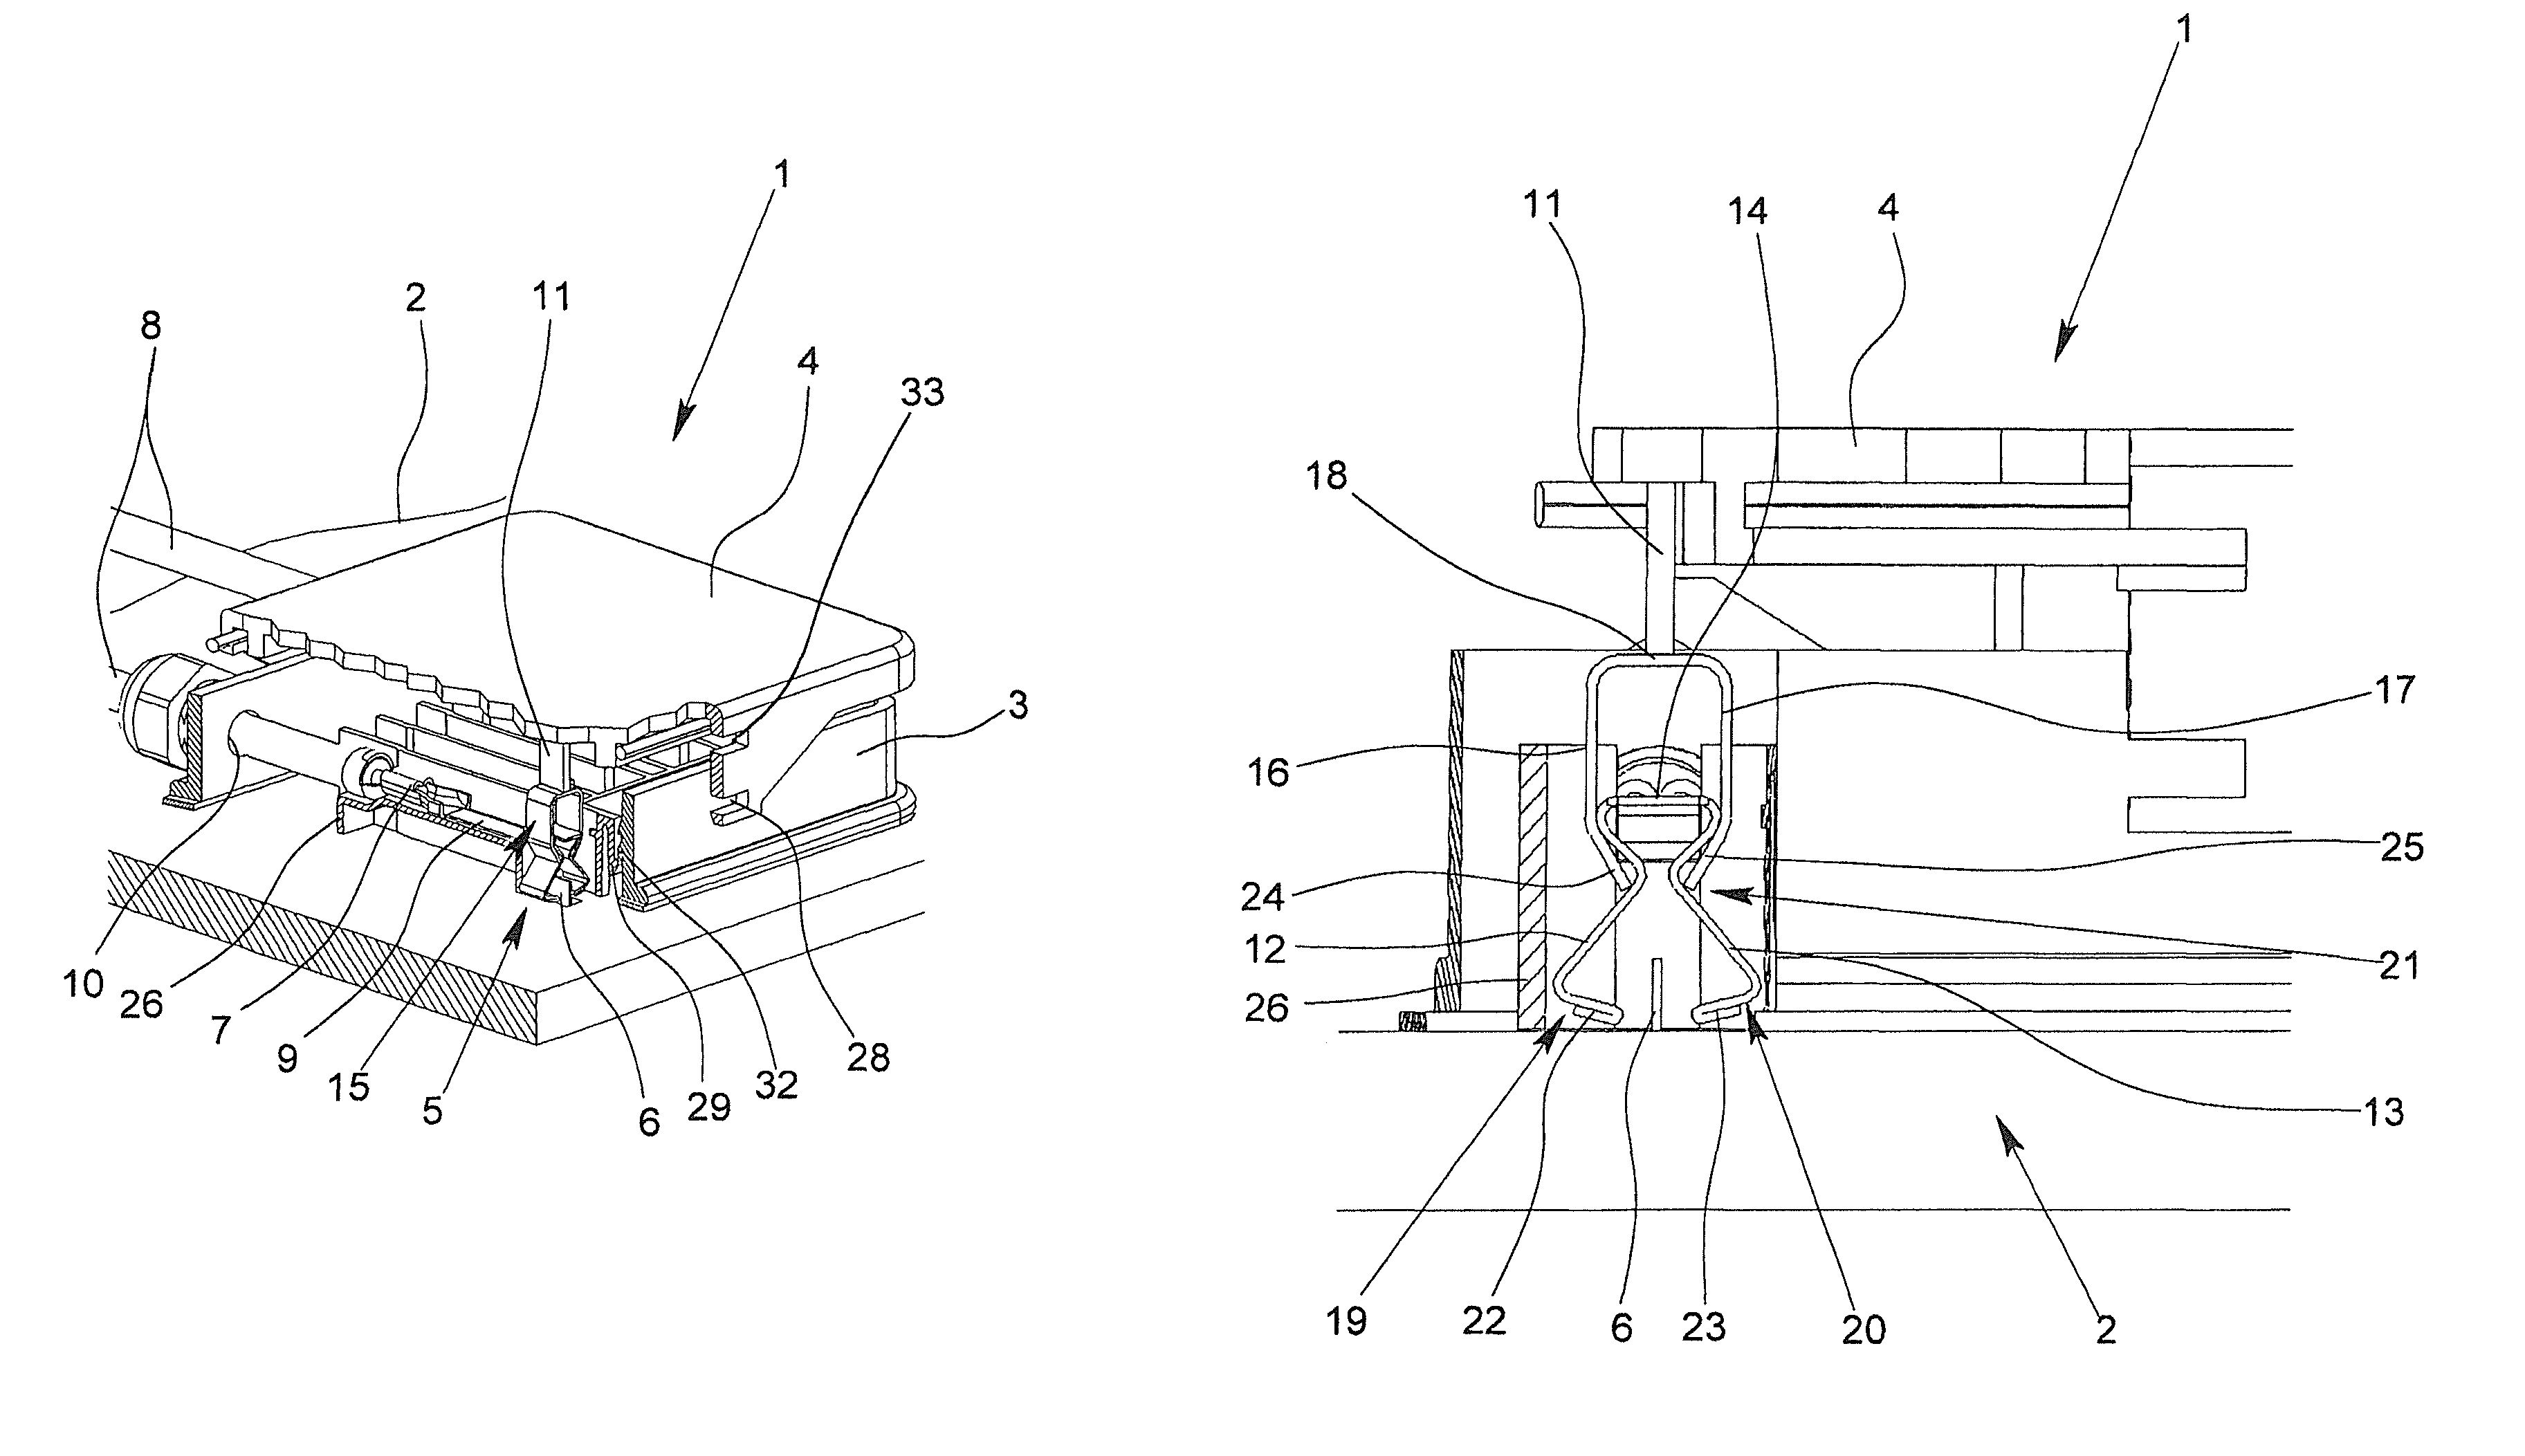 Terminating and connecting device